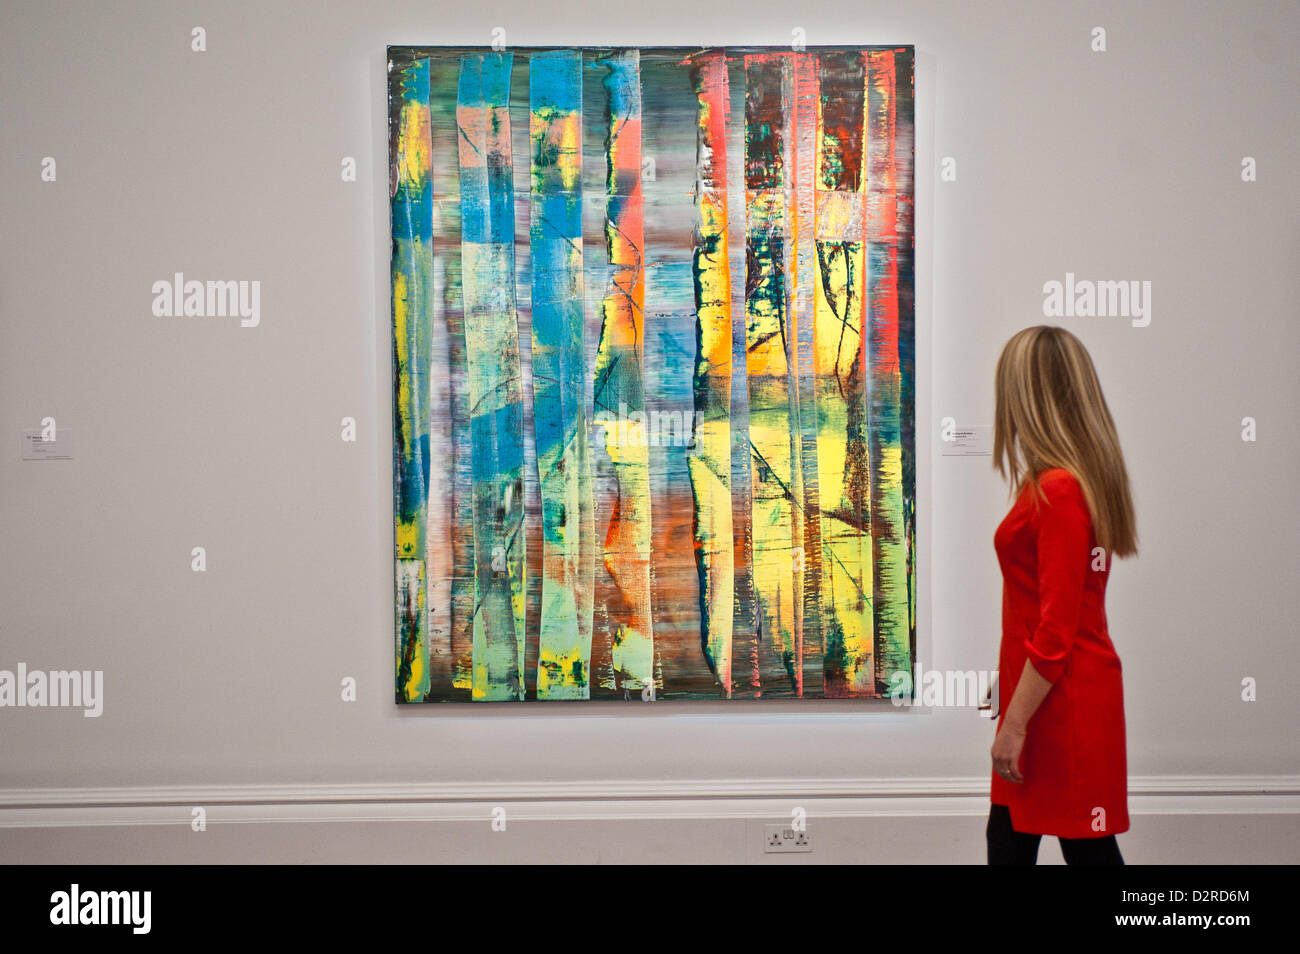 London, UK. 31 January 2013.  A Sotheby's employee poses in front of a painting entitled 'Abstraktes Bild (769-1)' by Gerhard Richter (Est £ 7.5-9.5 million) during the press preview of the Sotheby's forthcoming February sales of Impressionist & Modern Art and Contemporary Art in London, including works by Picasso, Bacon, Monet, Richter, Miró, Basquiat. Credit:  pcruciatti / Alamy Live News Stock Photo